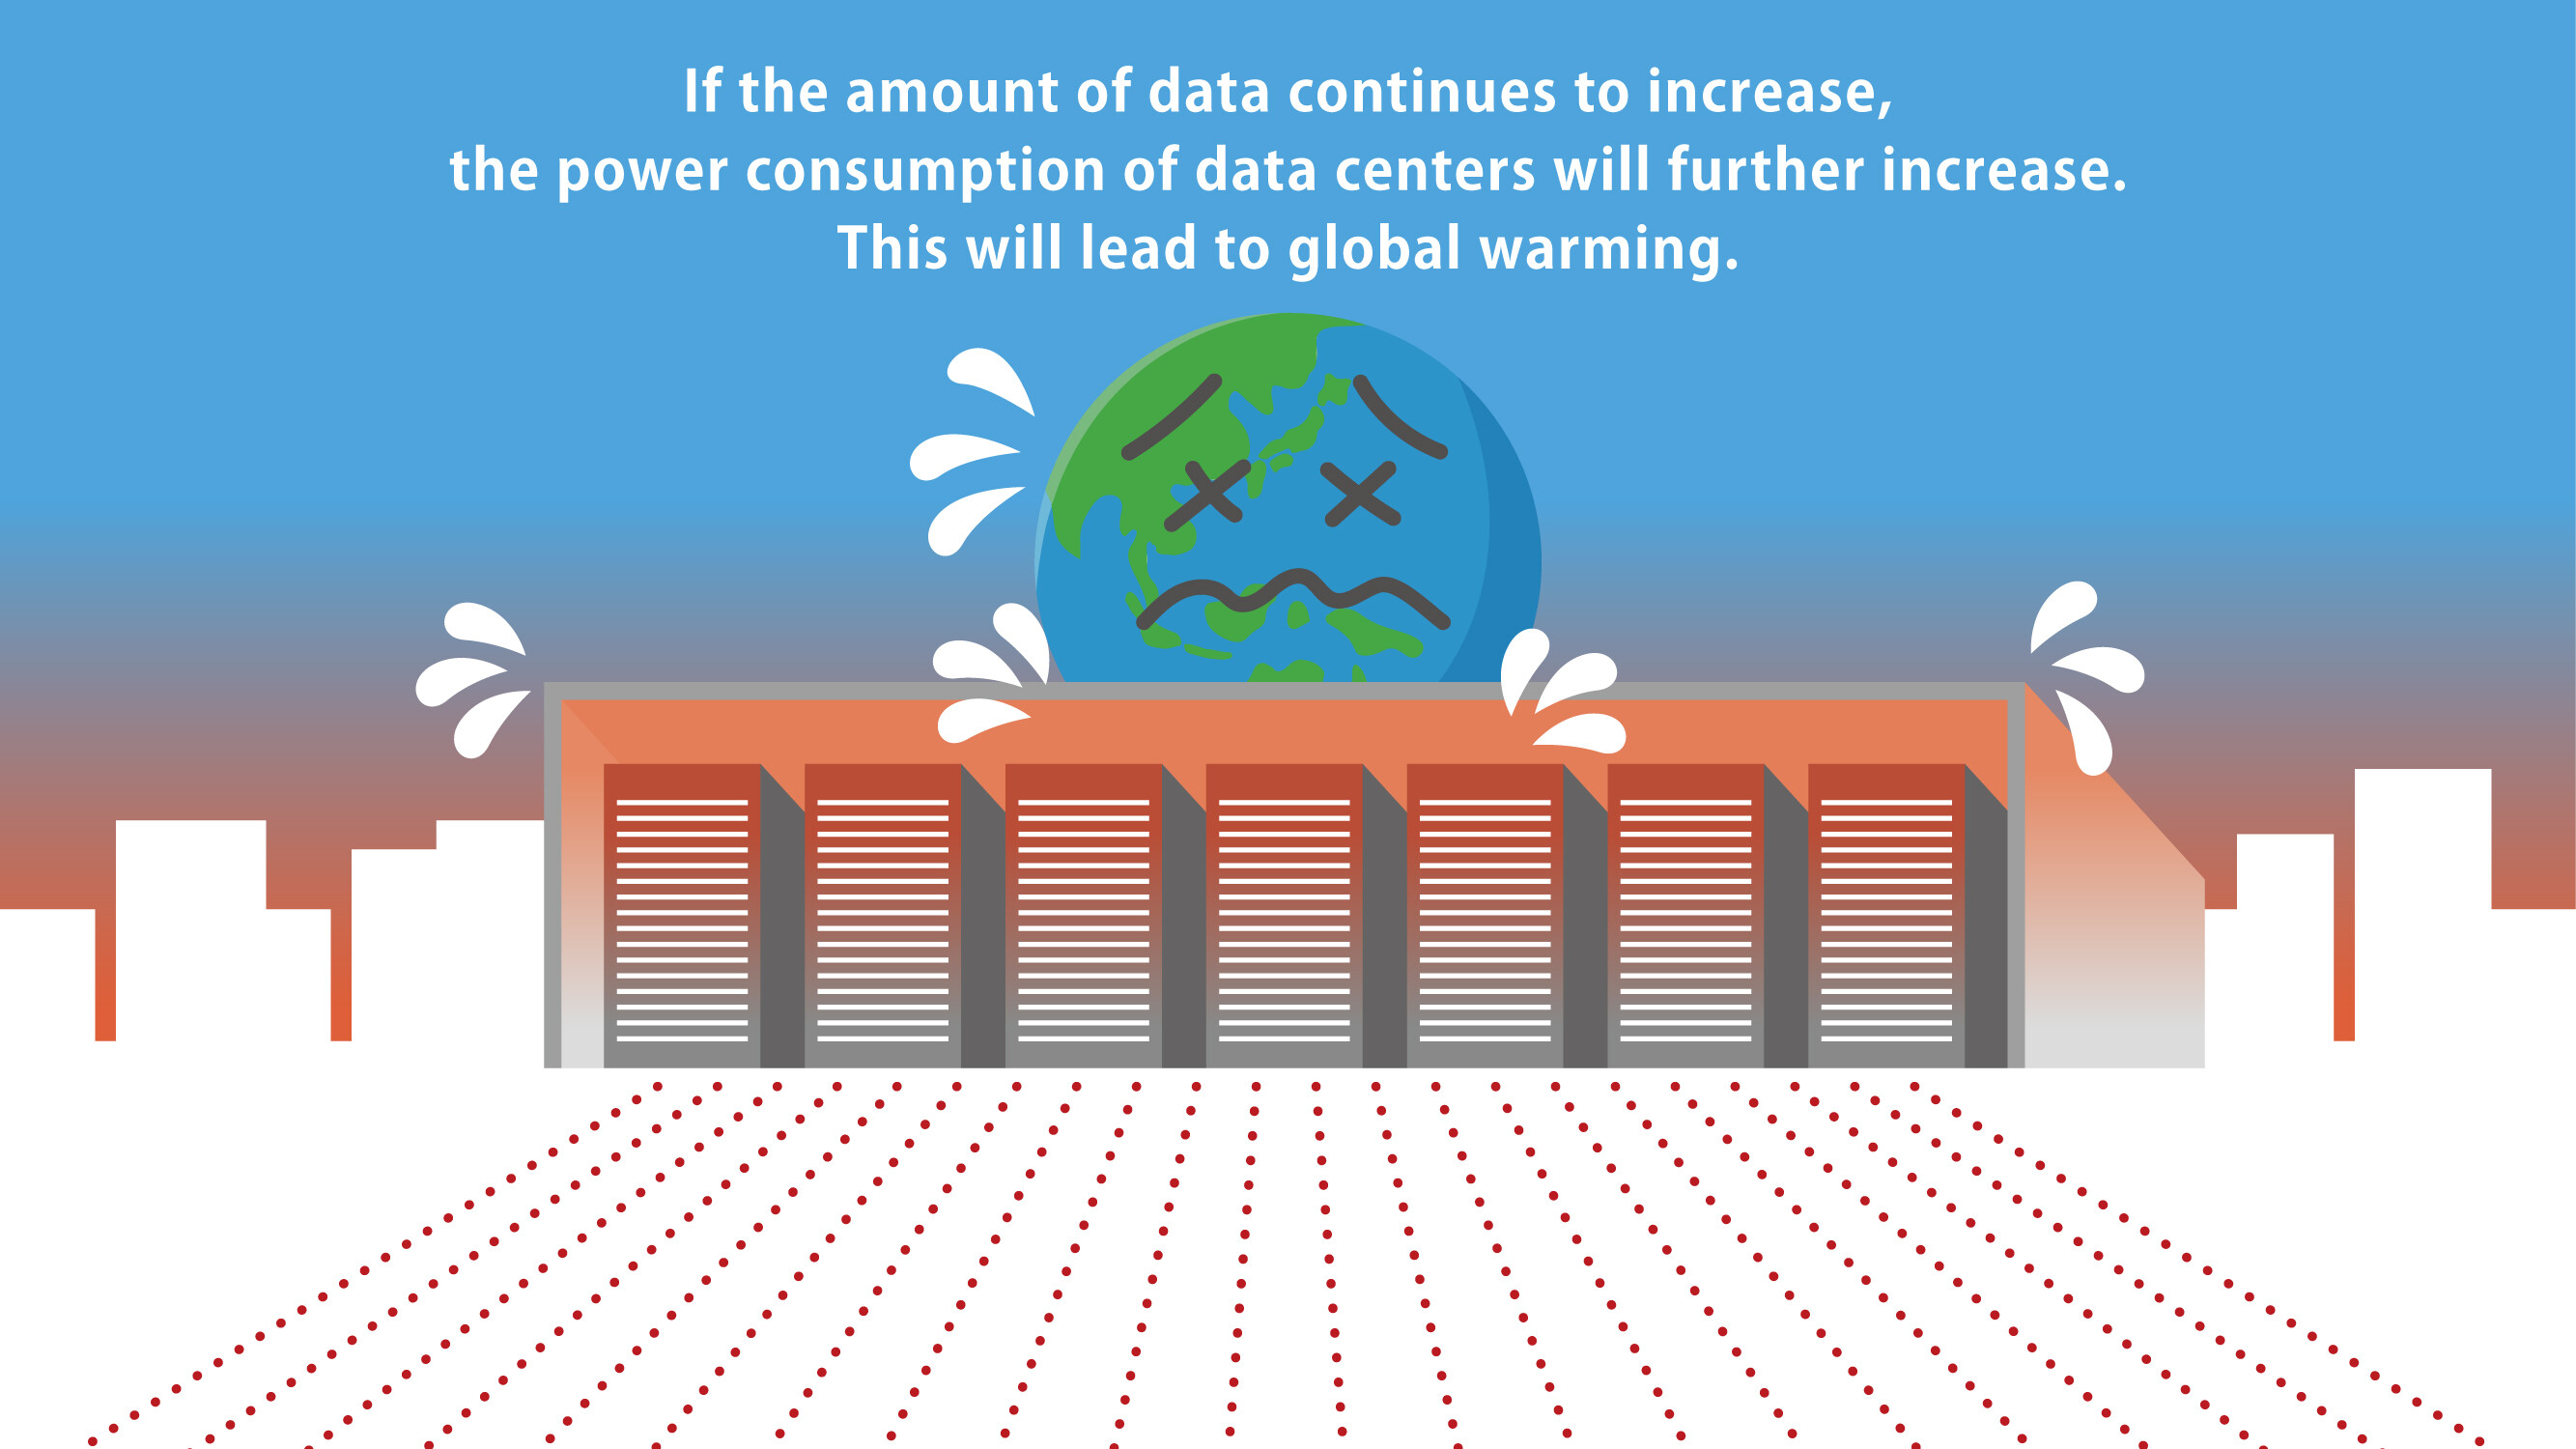 Images: (2) Will increasing data volumes lead to a global power shortage?